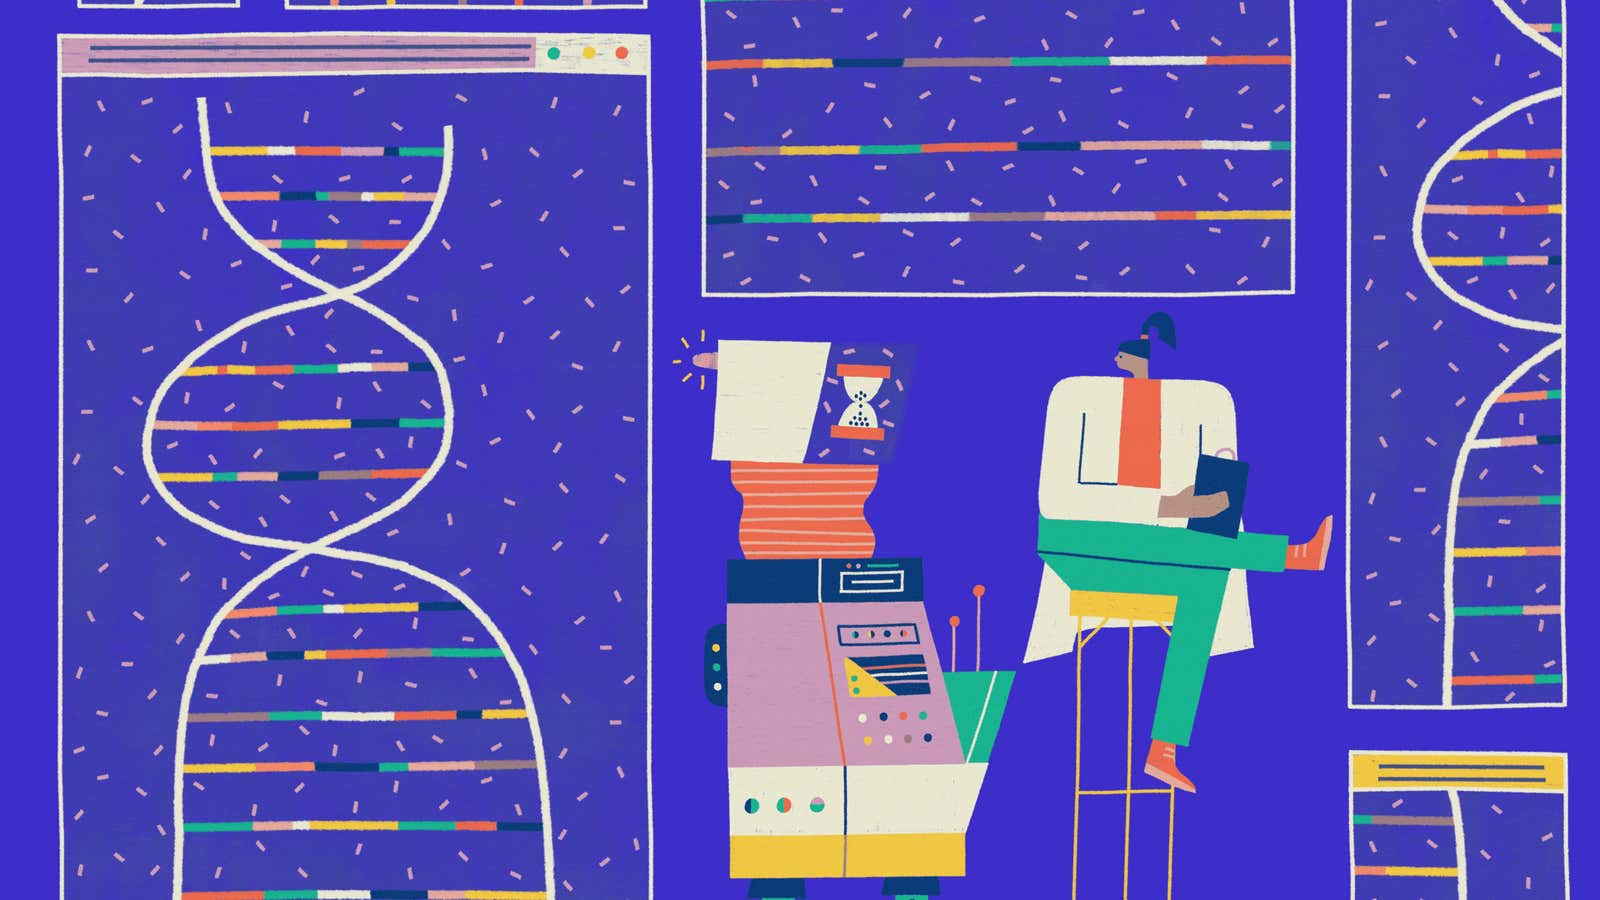 Illustration of how artificial intelligence will use genetic information to improve cancer diagnostics.